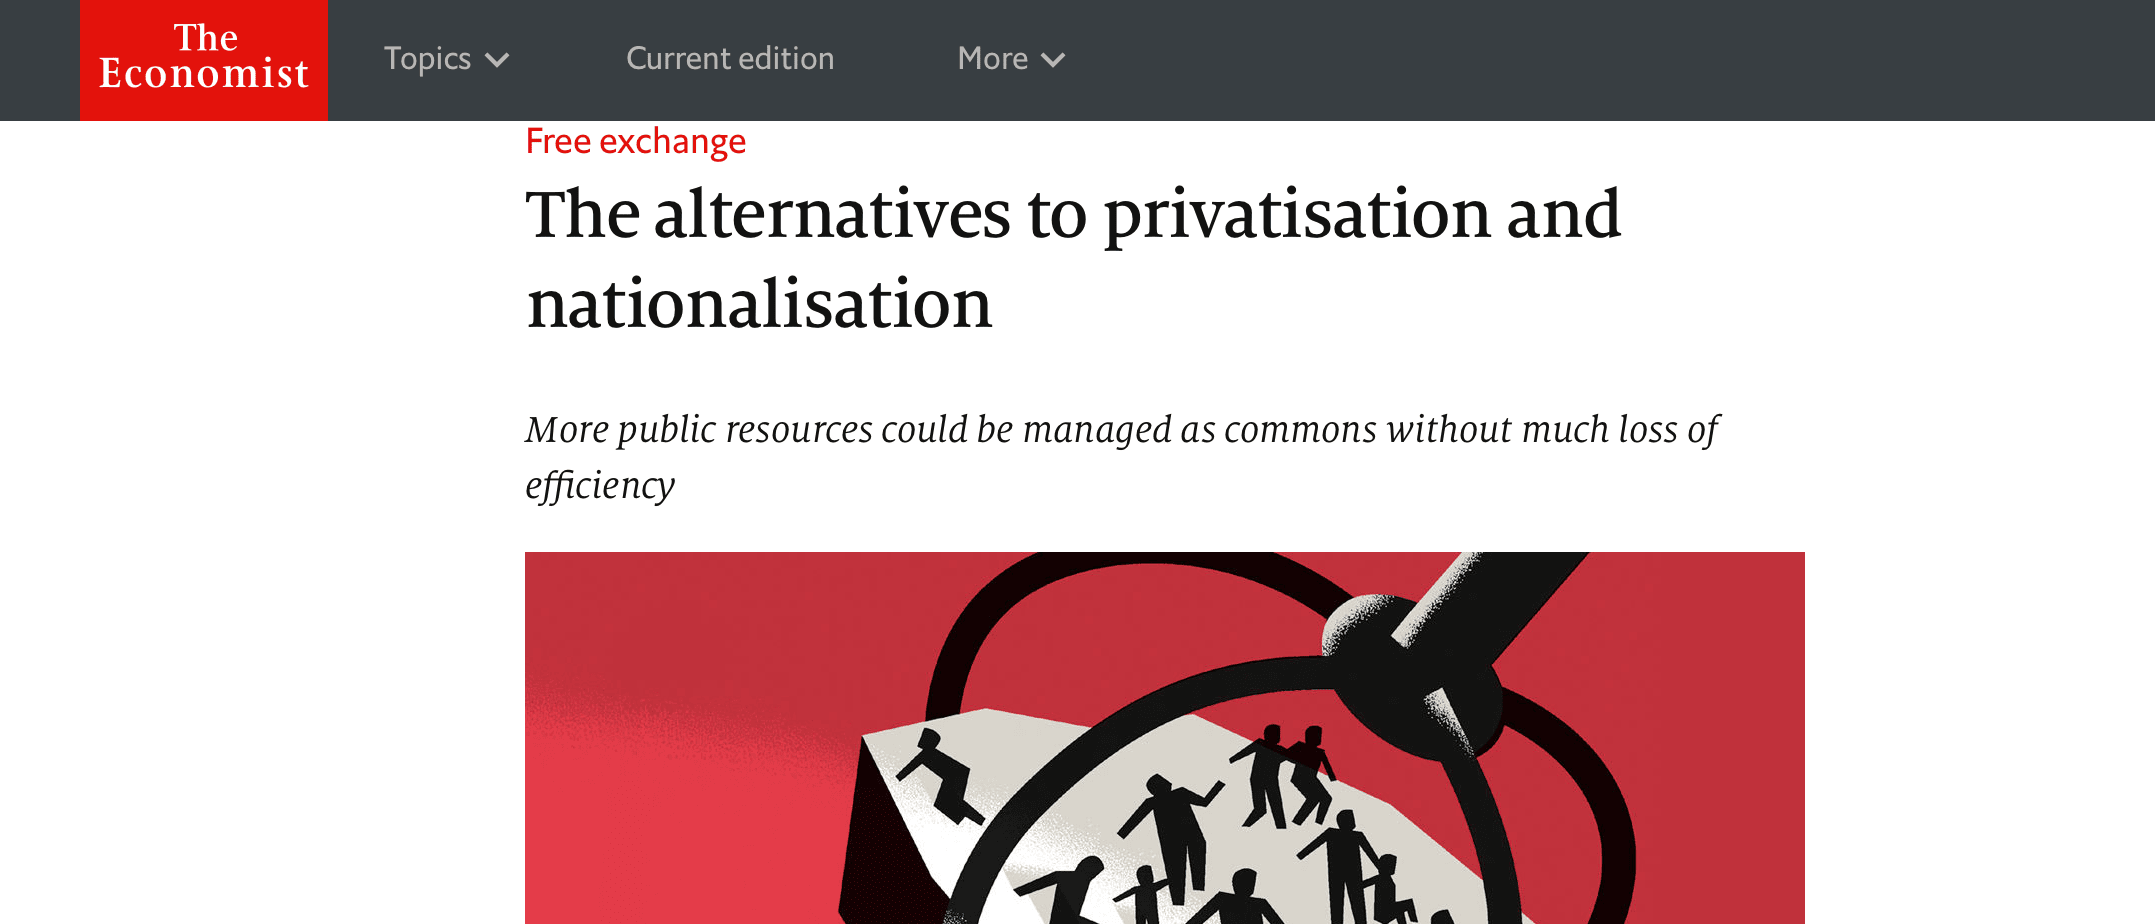 The Economist - The alternatives to privatisation and nationalisation